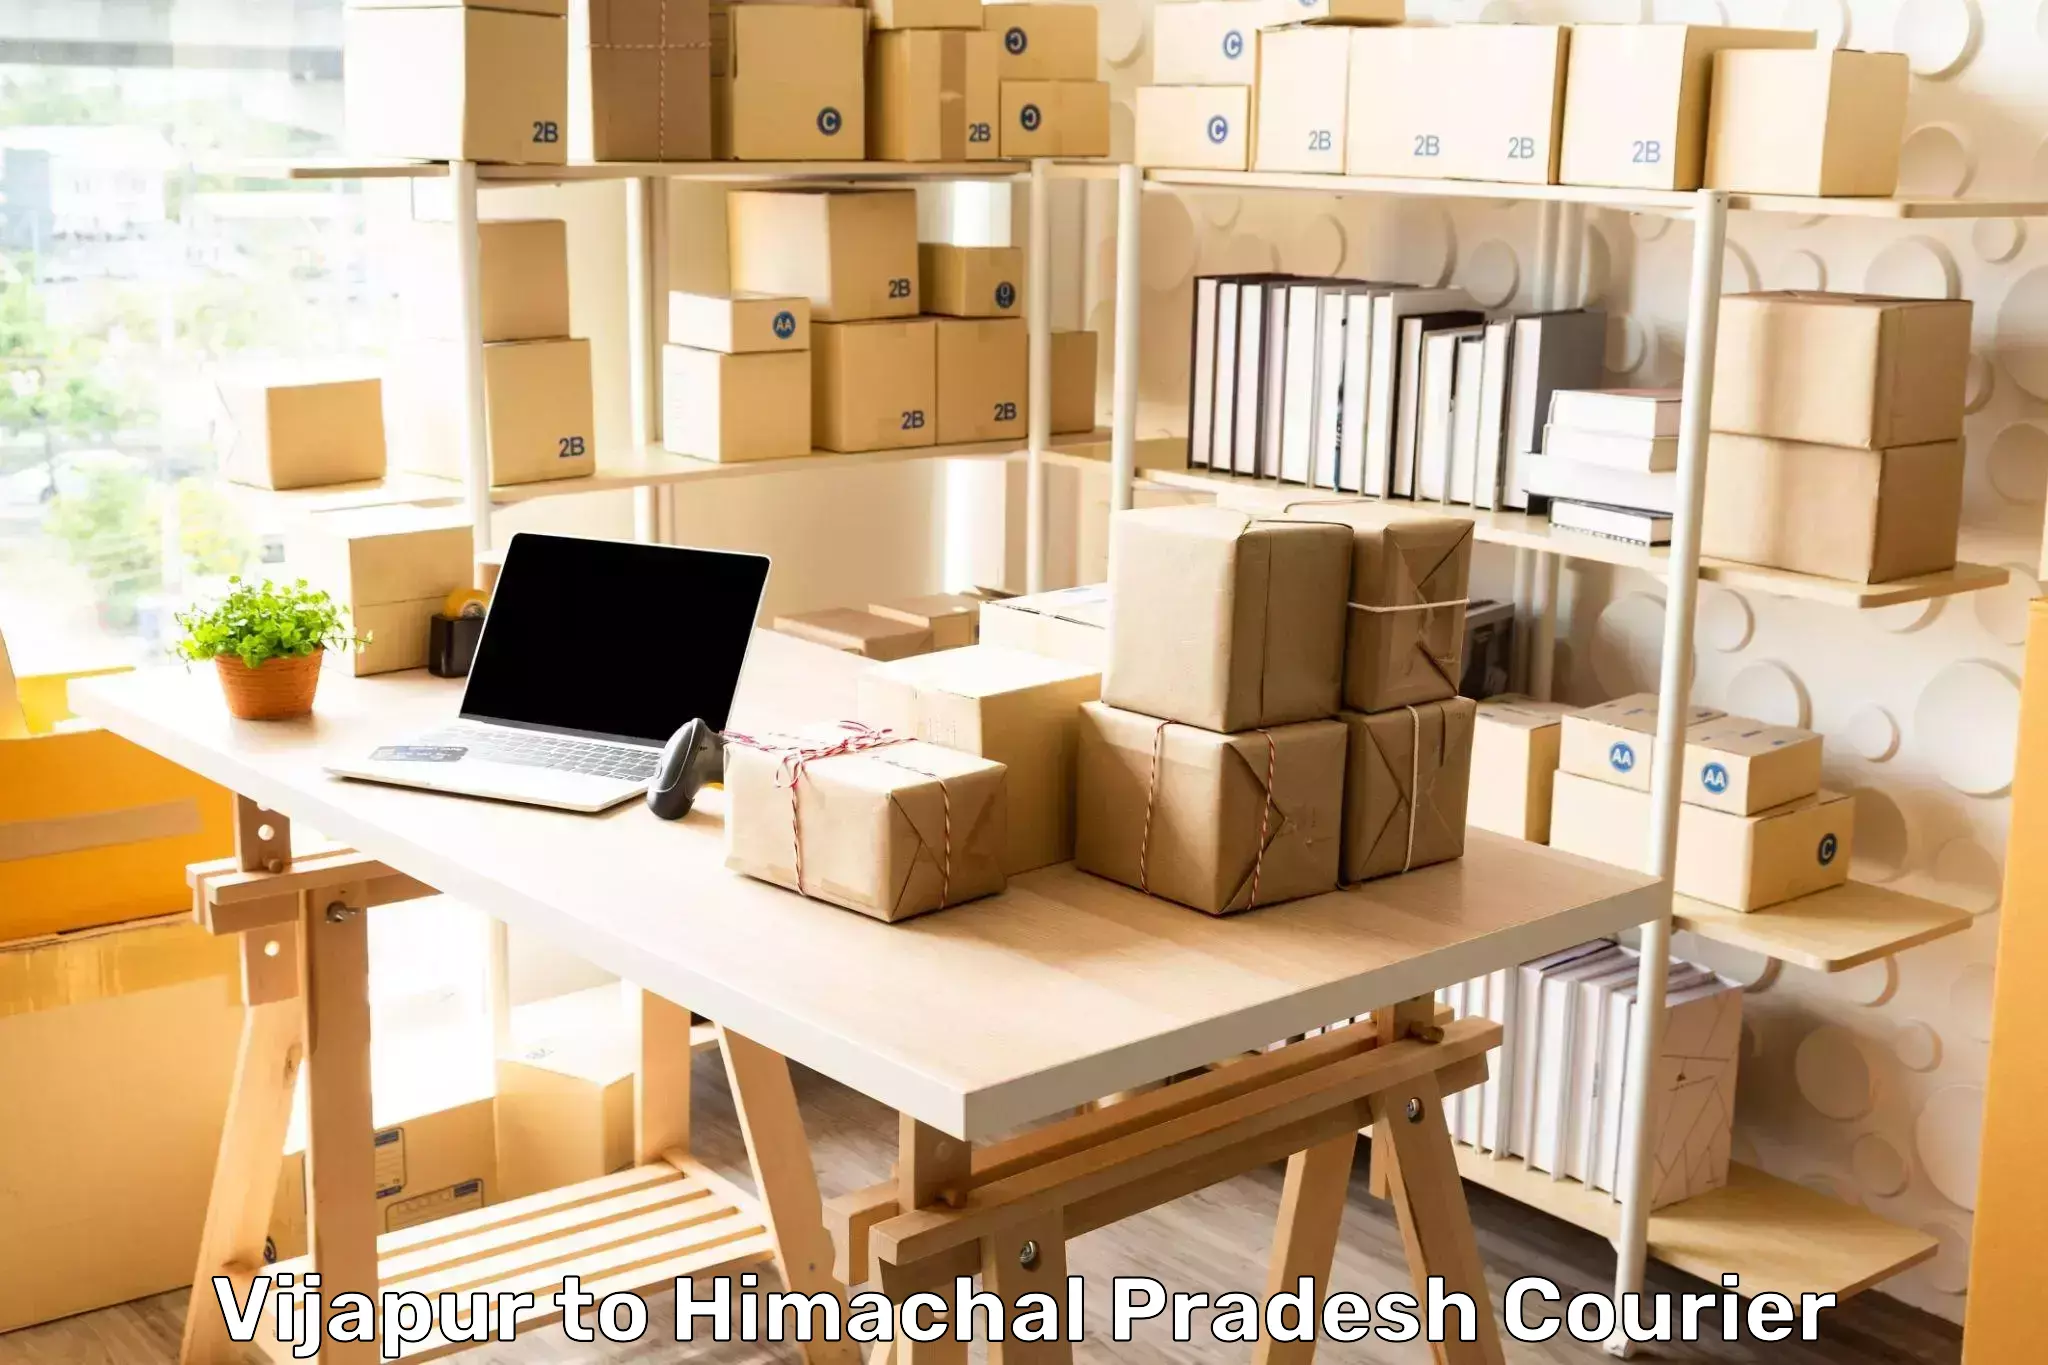 Large package courier Vijapur to Dharamshala